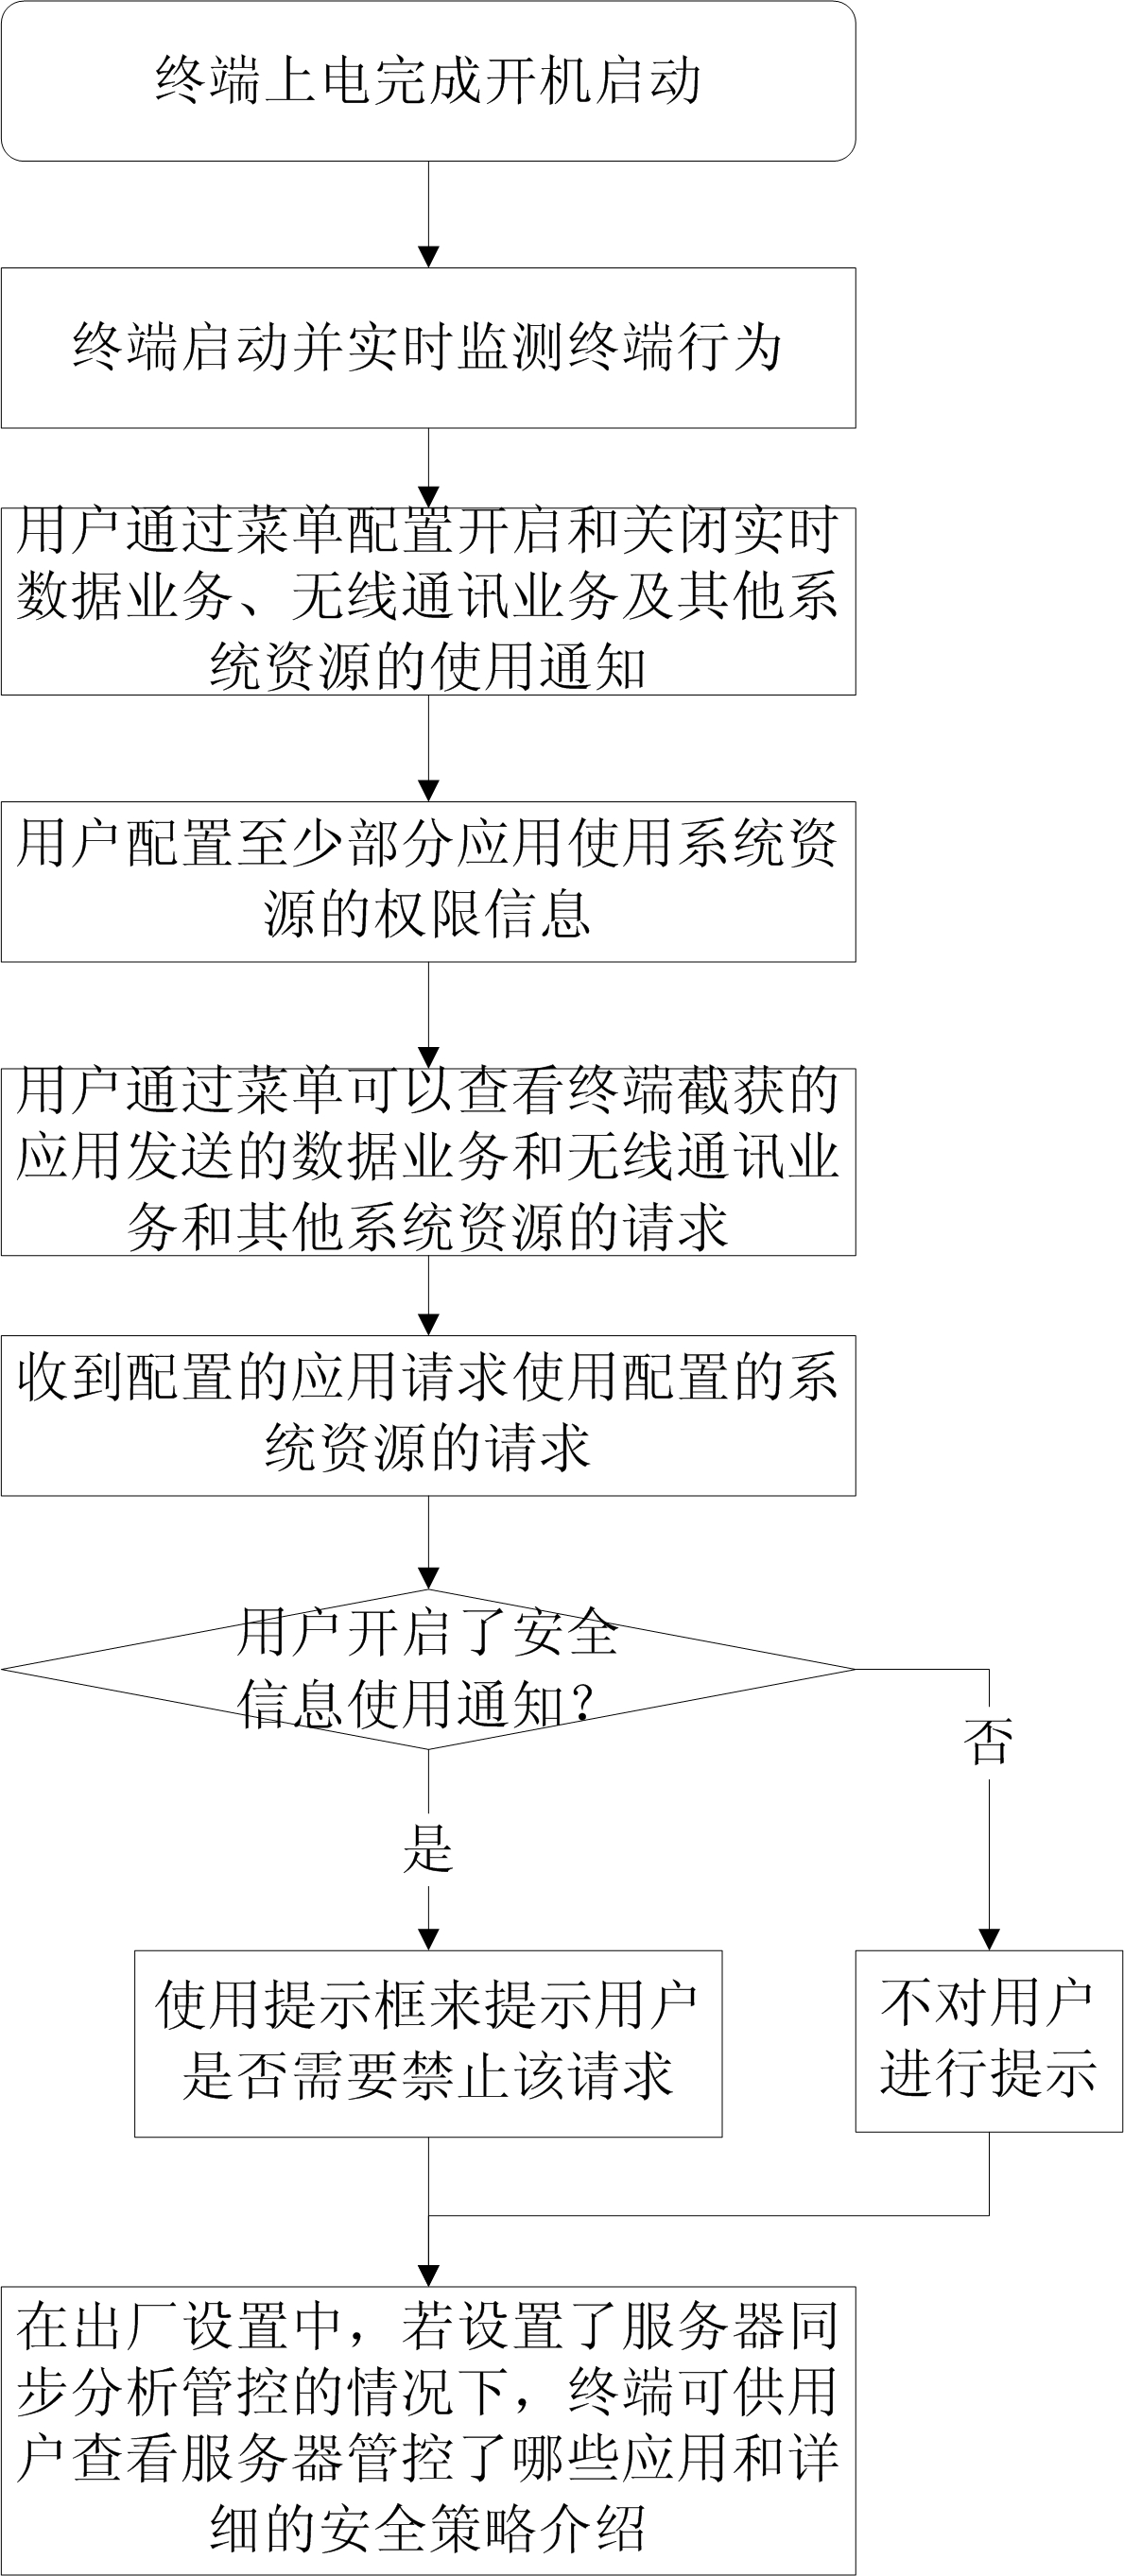 Method and system for monitoring applications